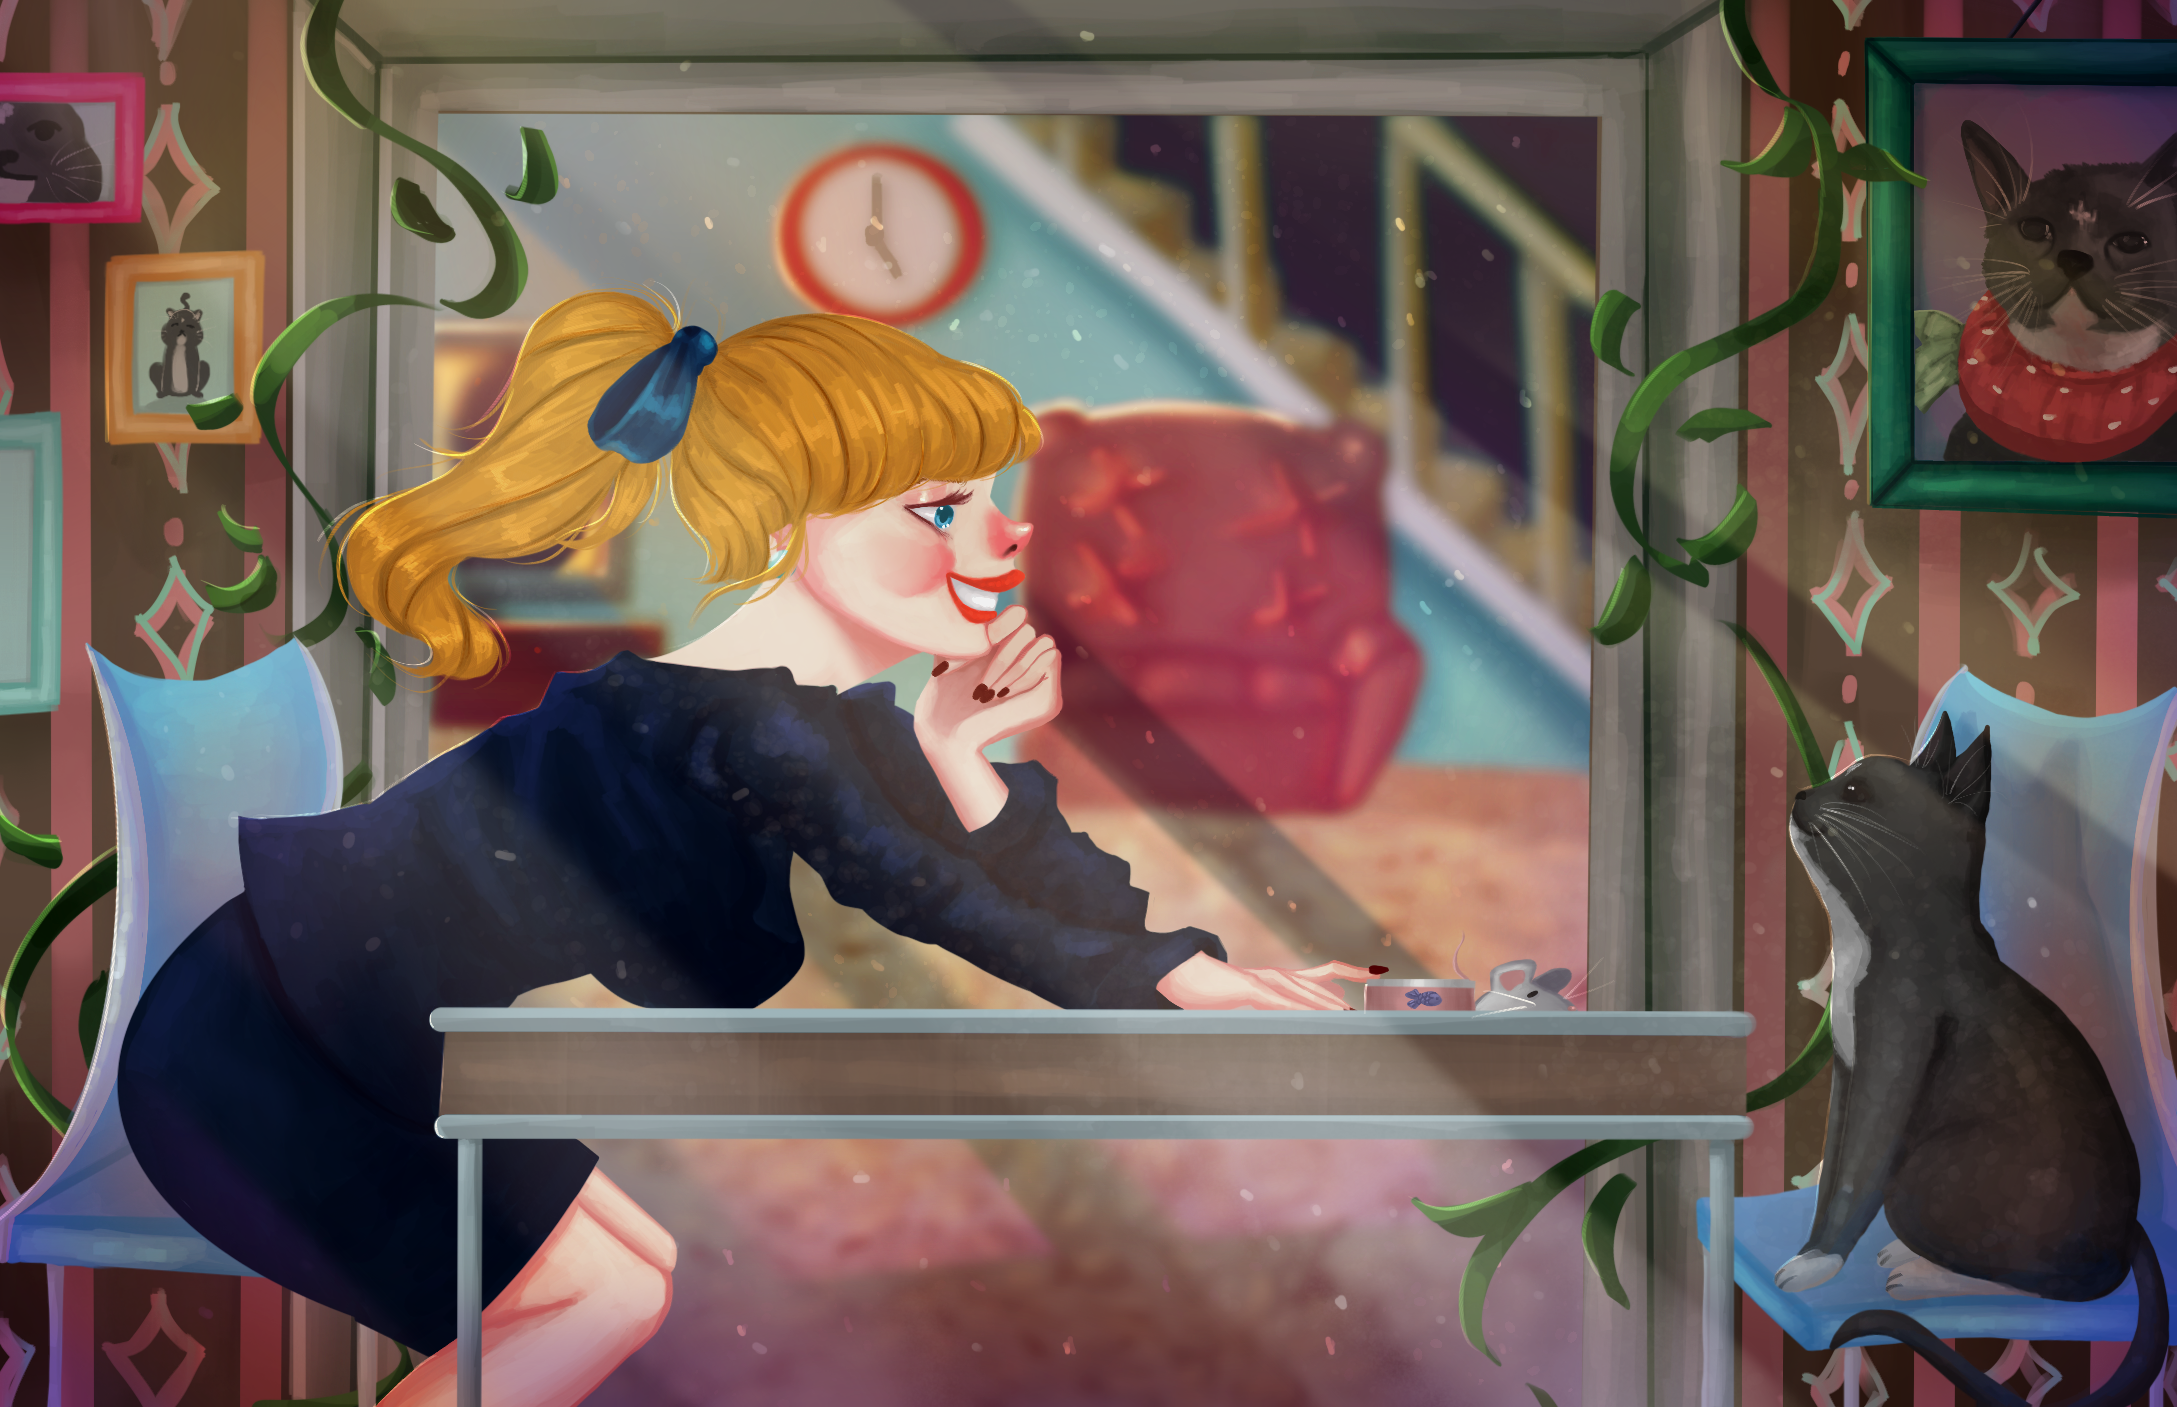 A digital illustration in which a blonde woman and a gray cat look at each other from opposite ends of a table. The woman leans, grinning, across the table. She uses one outstretched hand to push a can of fish and a plush mouse toy towards the cat. The wall behind the two figures is decorated with framed pictures of the cat.